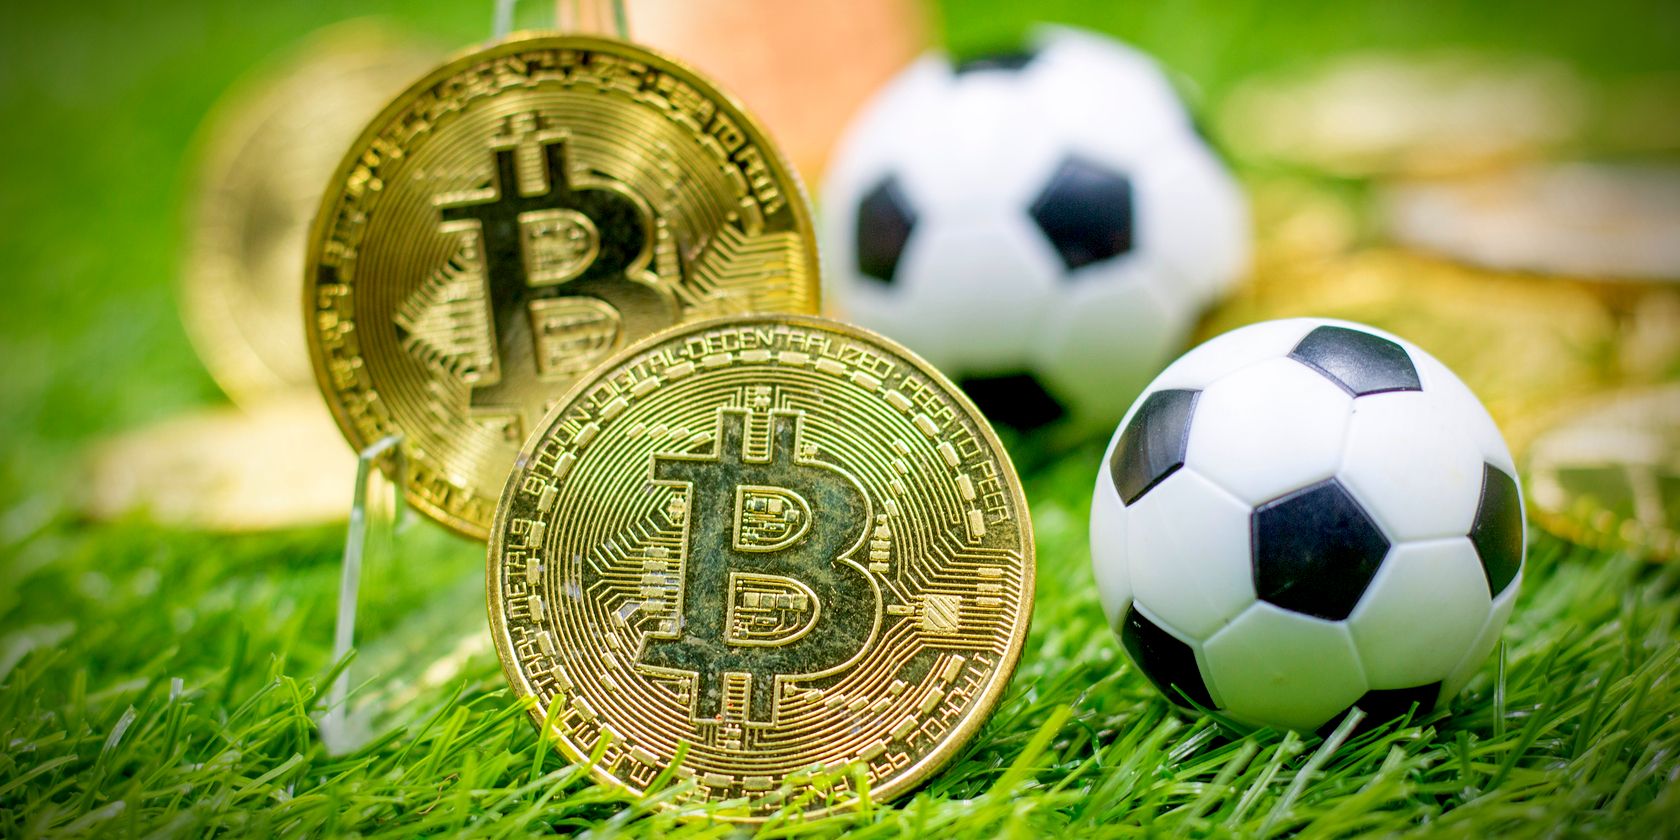 footballs and bitcoins feature